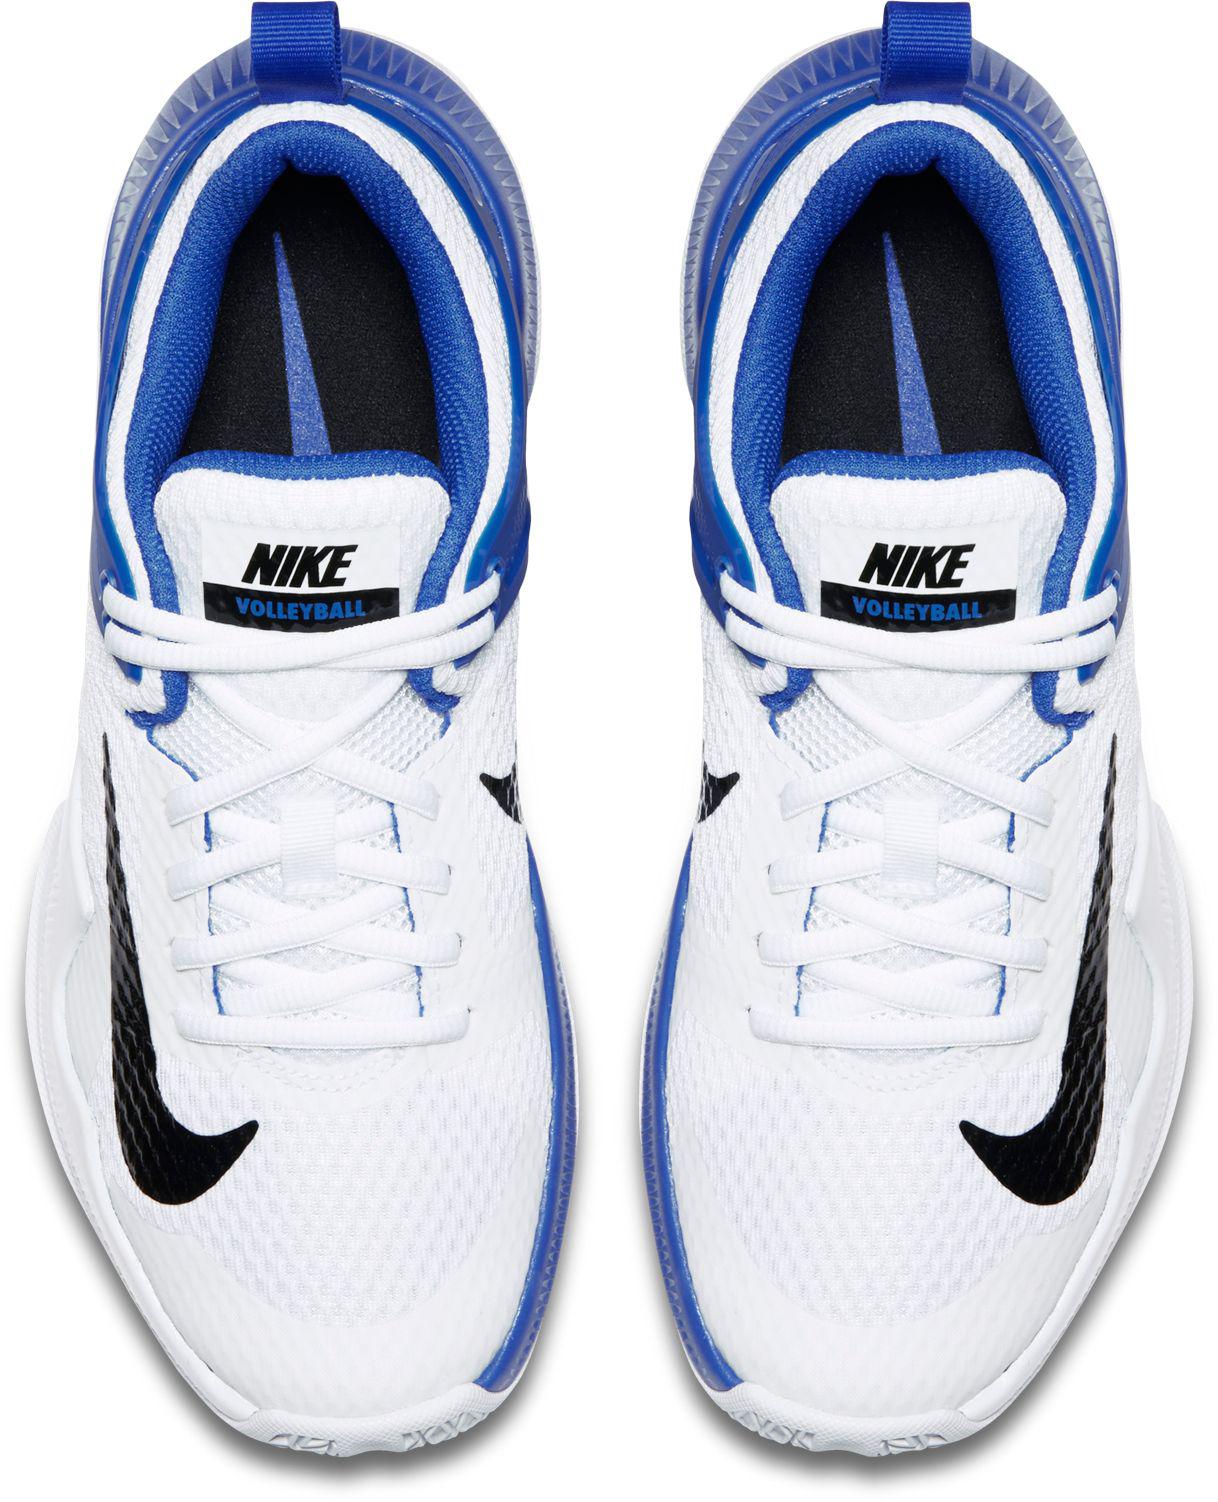 Lyst - Nike Air Zoom Hyperace Volleyball Shoes in Blue